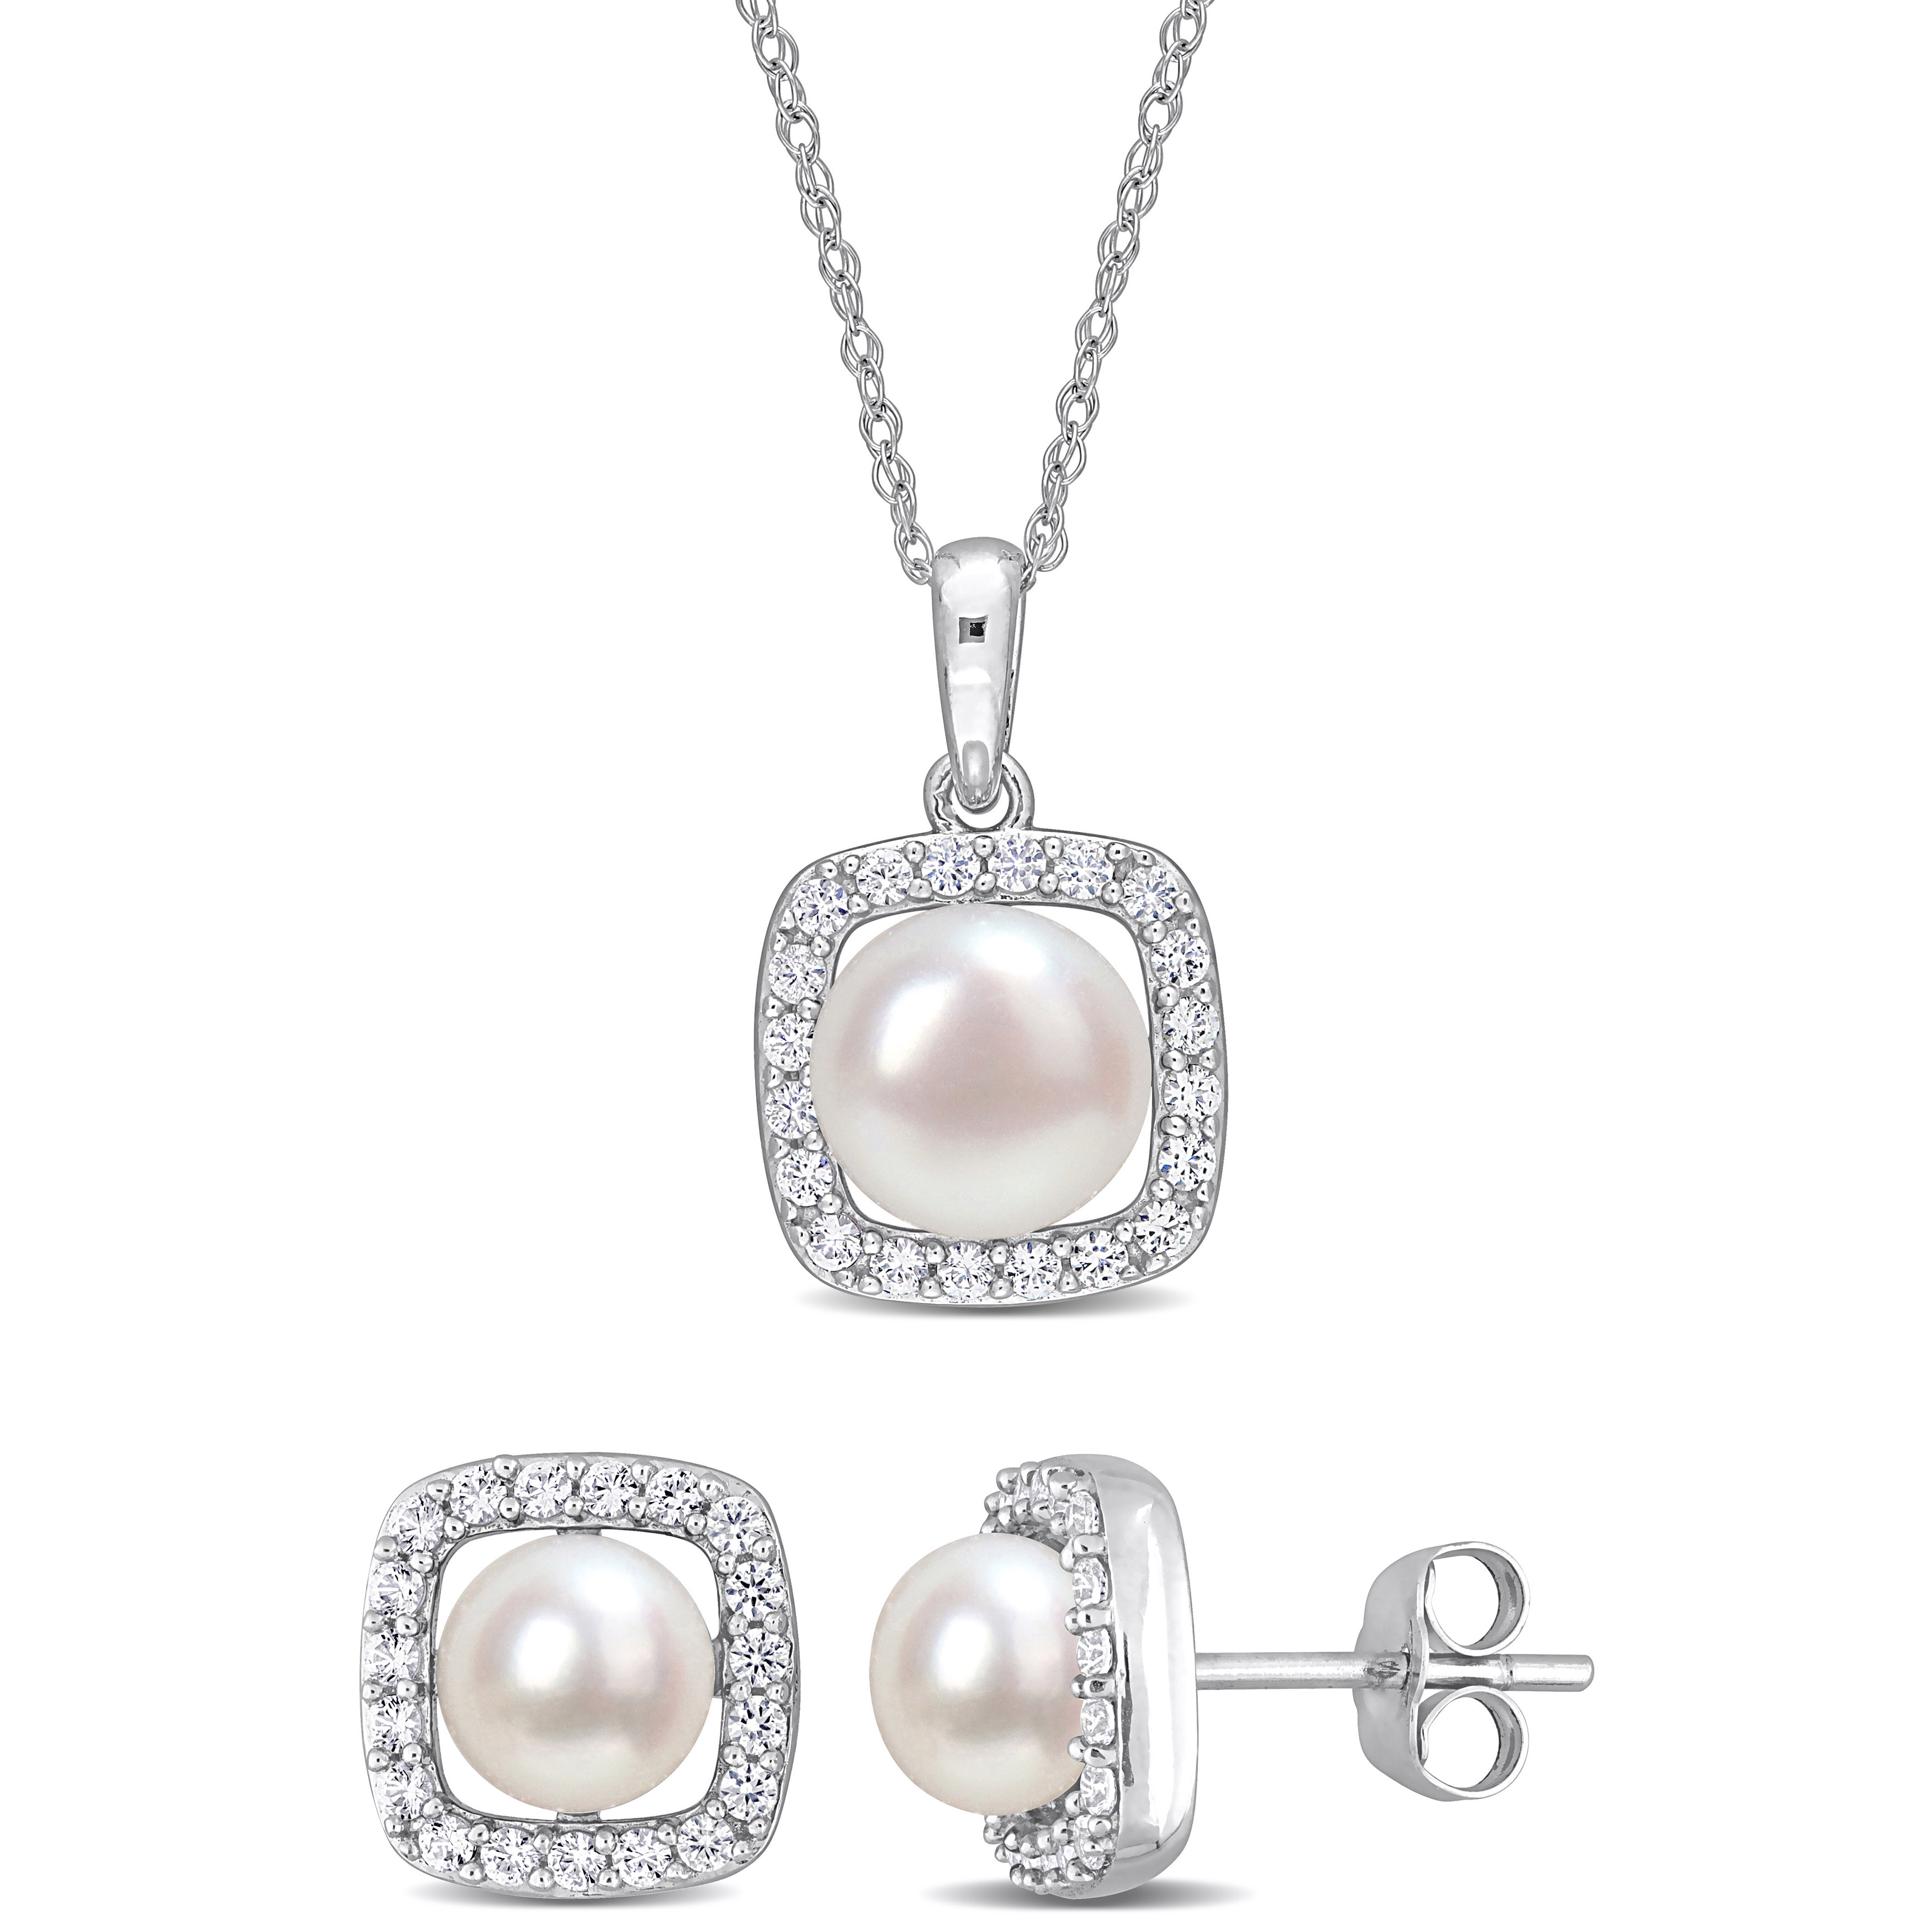 6-7.5 MM White Round Cultured Freshwater Pearl and 3/5 CT TGW Created White Sapphire 2-Piece Halo Necklace and Earrings Set in 10k White Gold